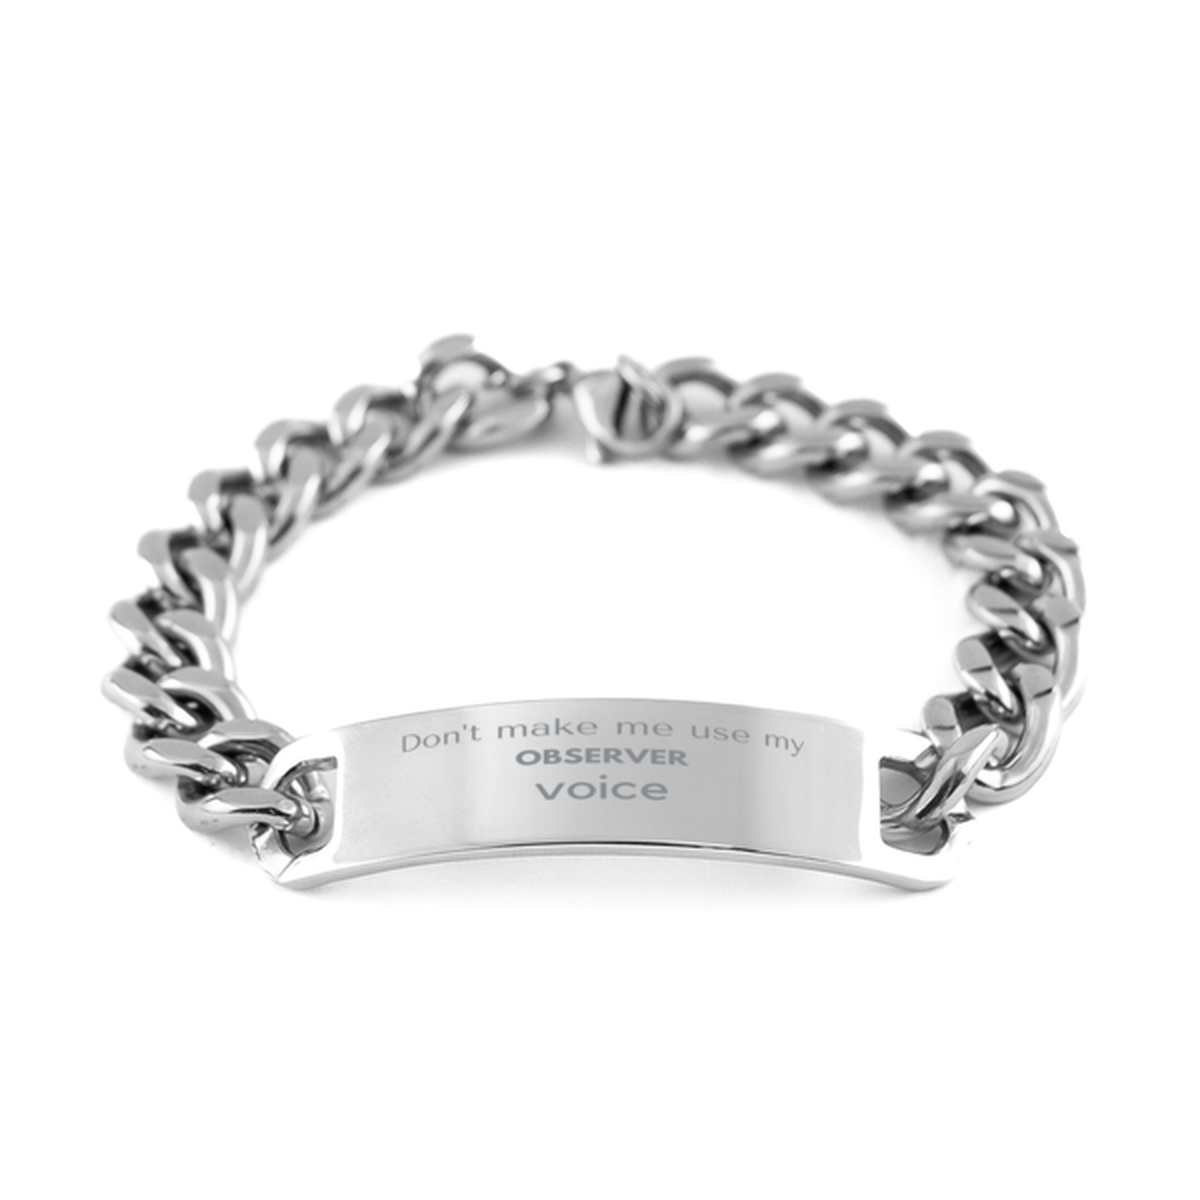 Don't make me use my Observer voice, Sarcasm Observer Gifts, Christmas Observer Cuban Chain Stainless Steel Bracelet Birthday Unique Gifts For Observer Coworkers, Men, Women, Colleague, Friends